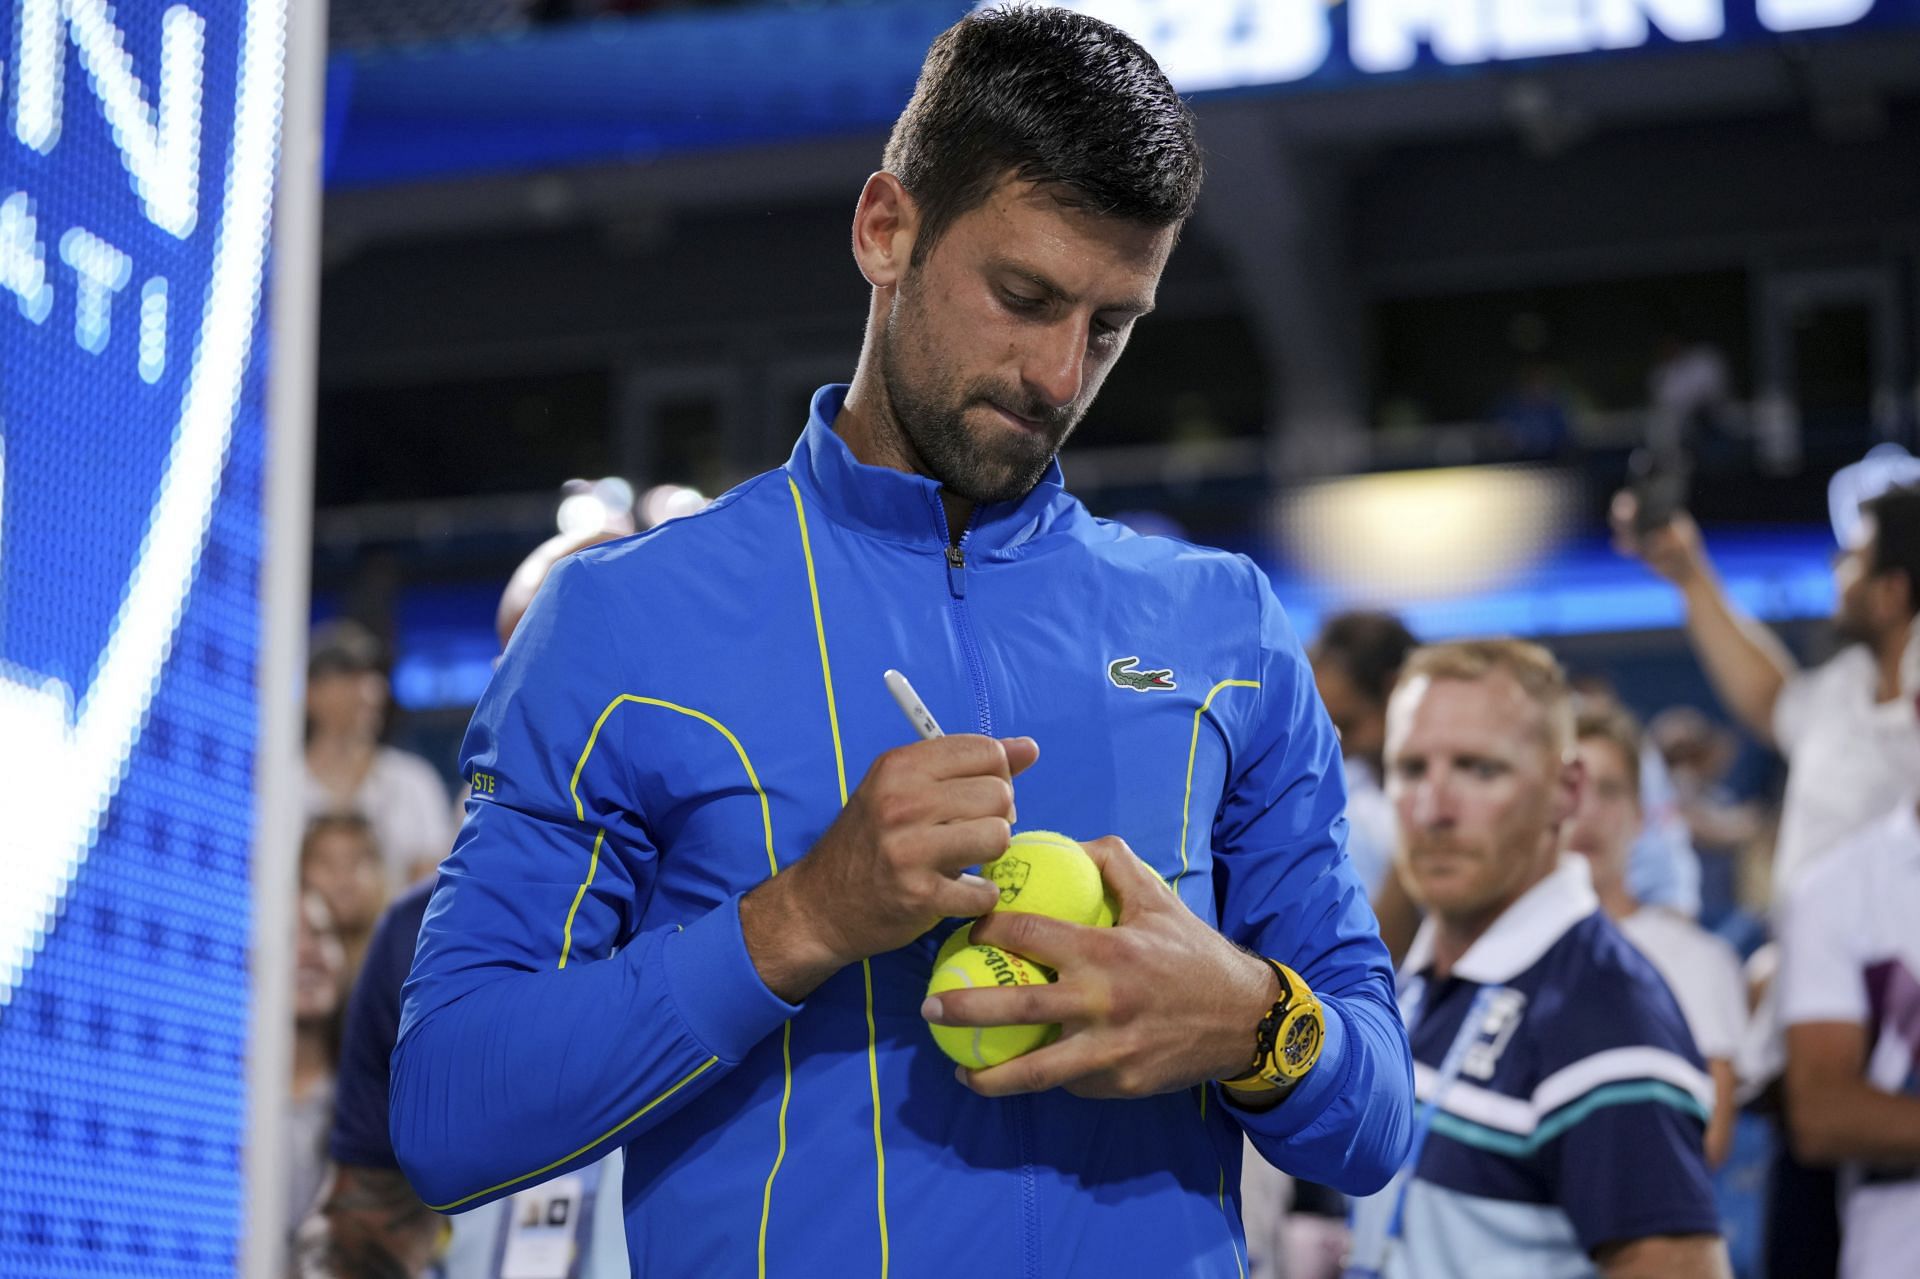 Djokovic returns to New York after two years.